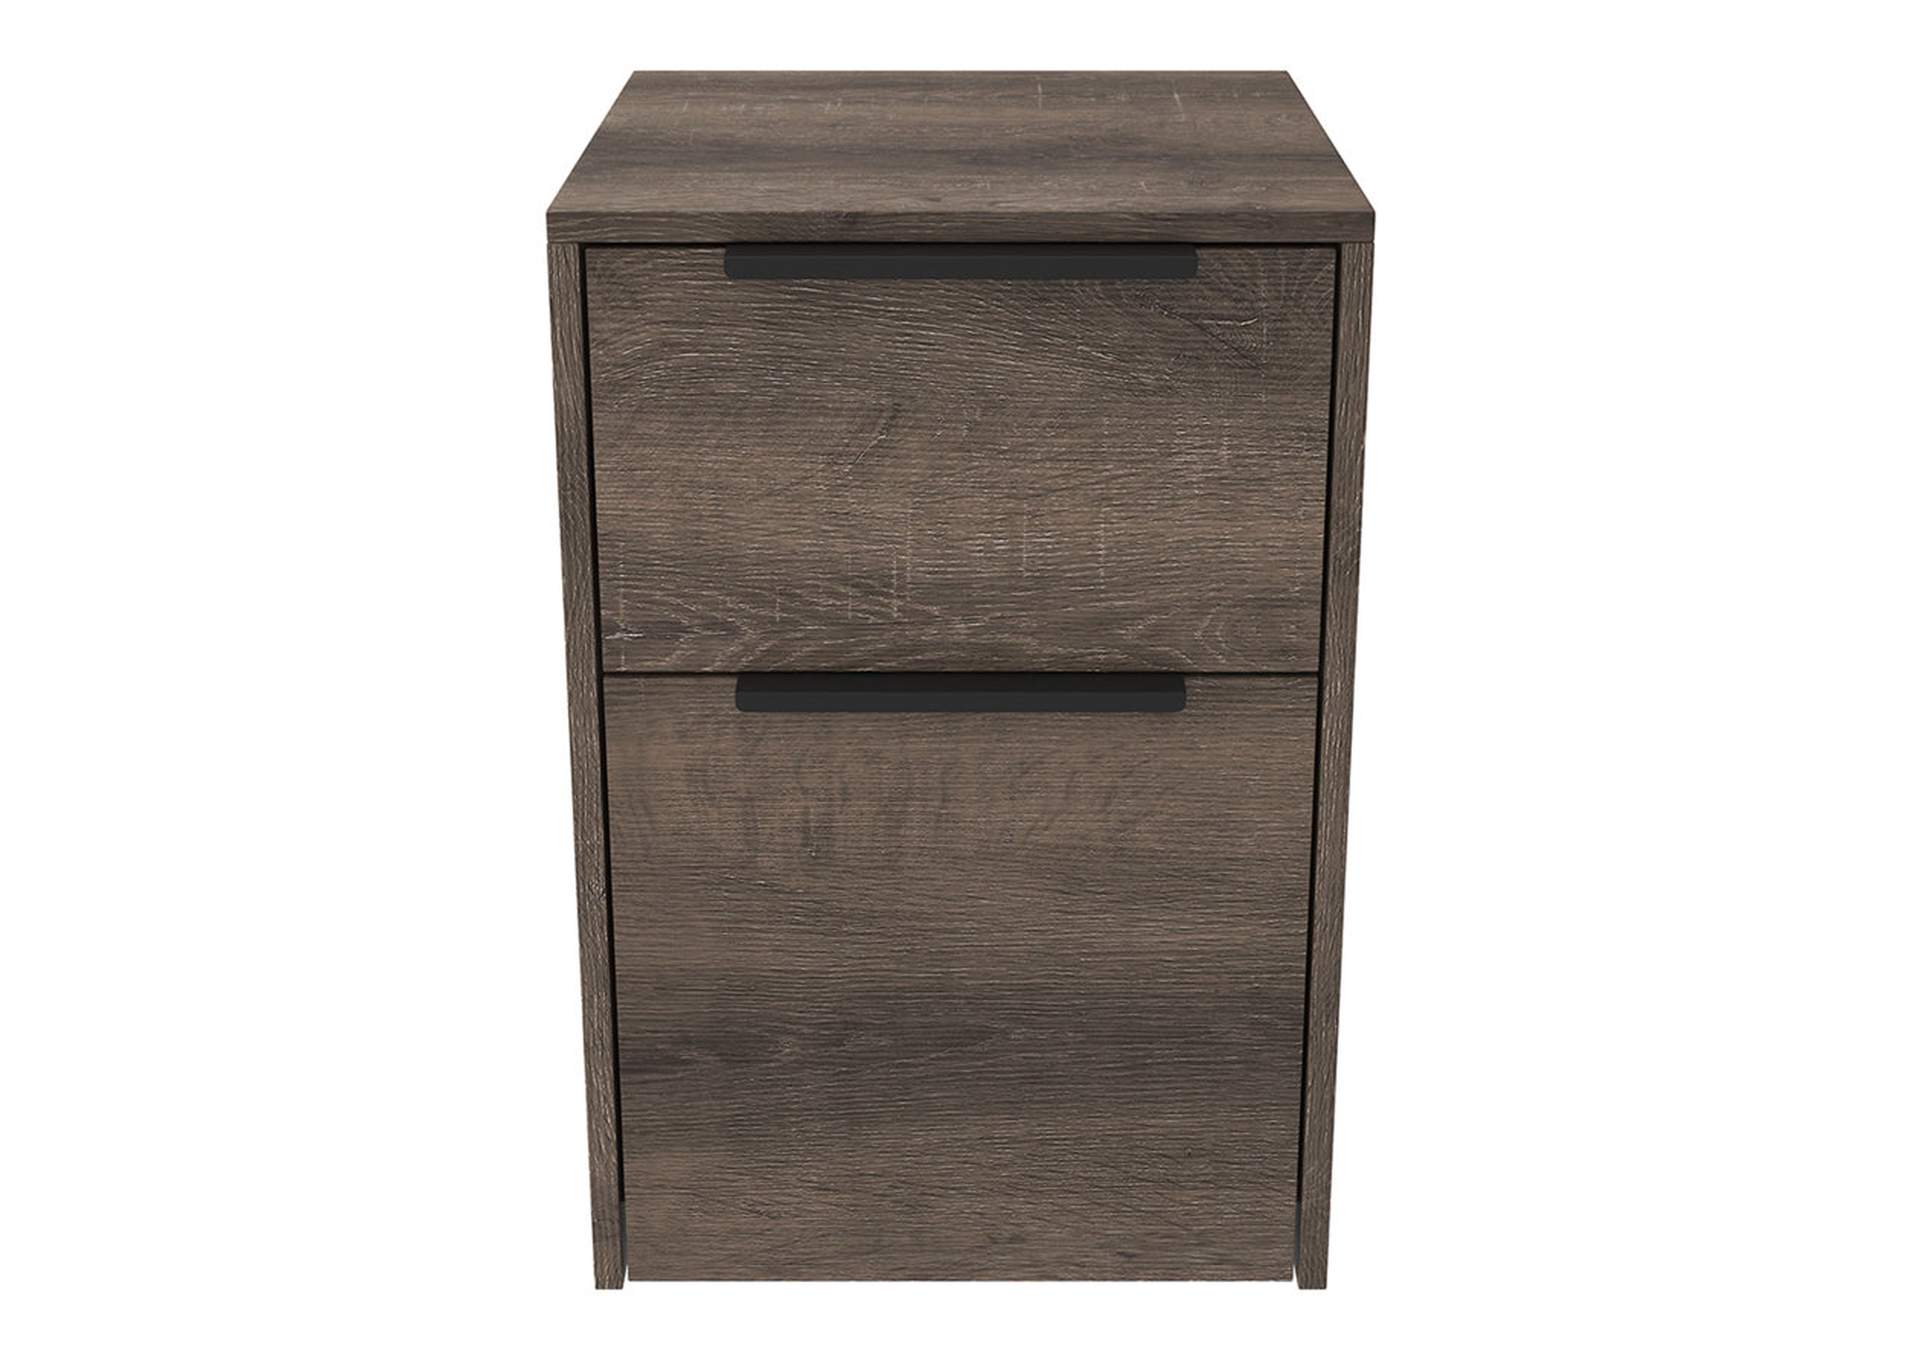 Arlenbry File Cabinet,Direct To Consumer Express